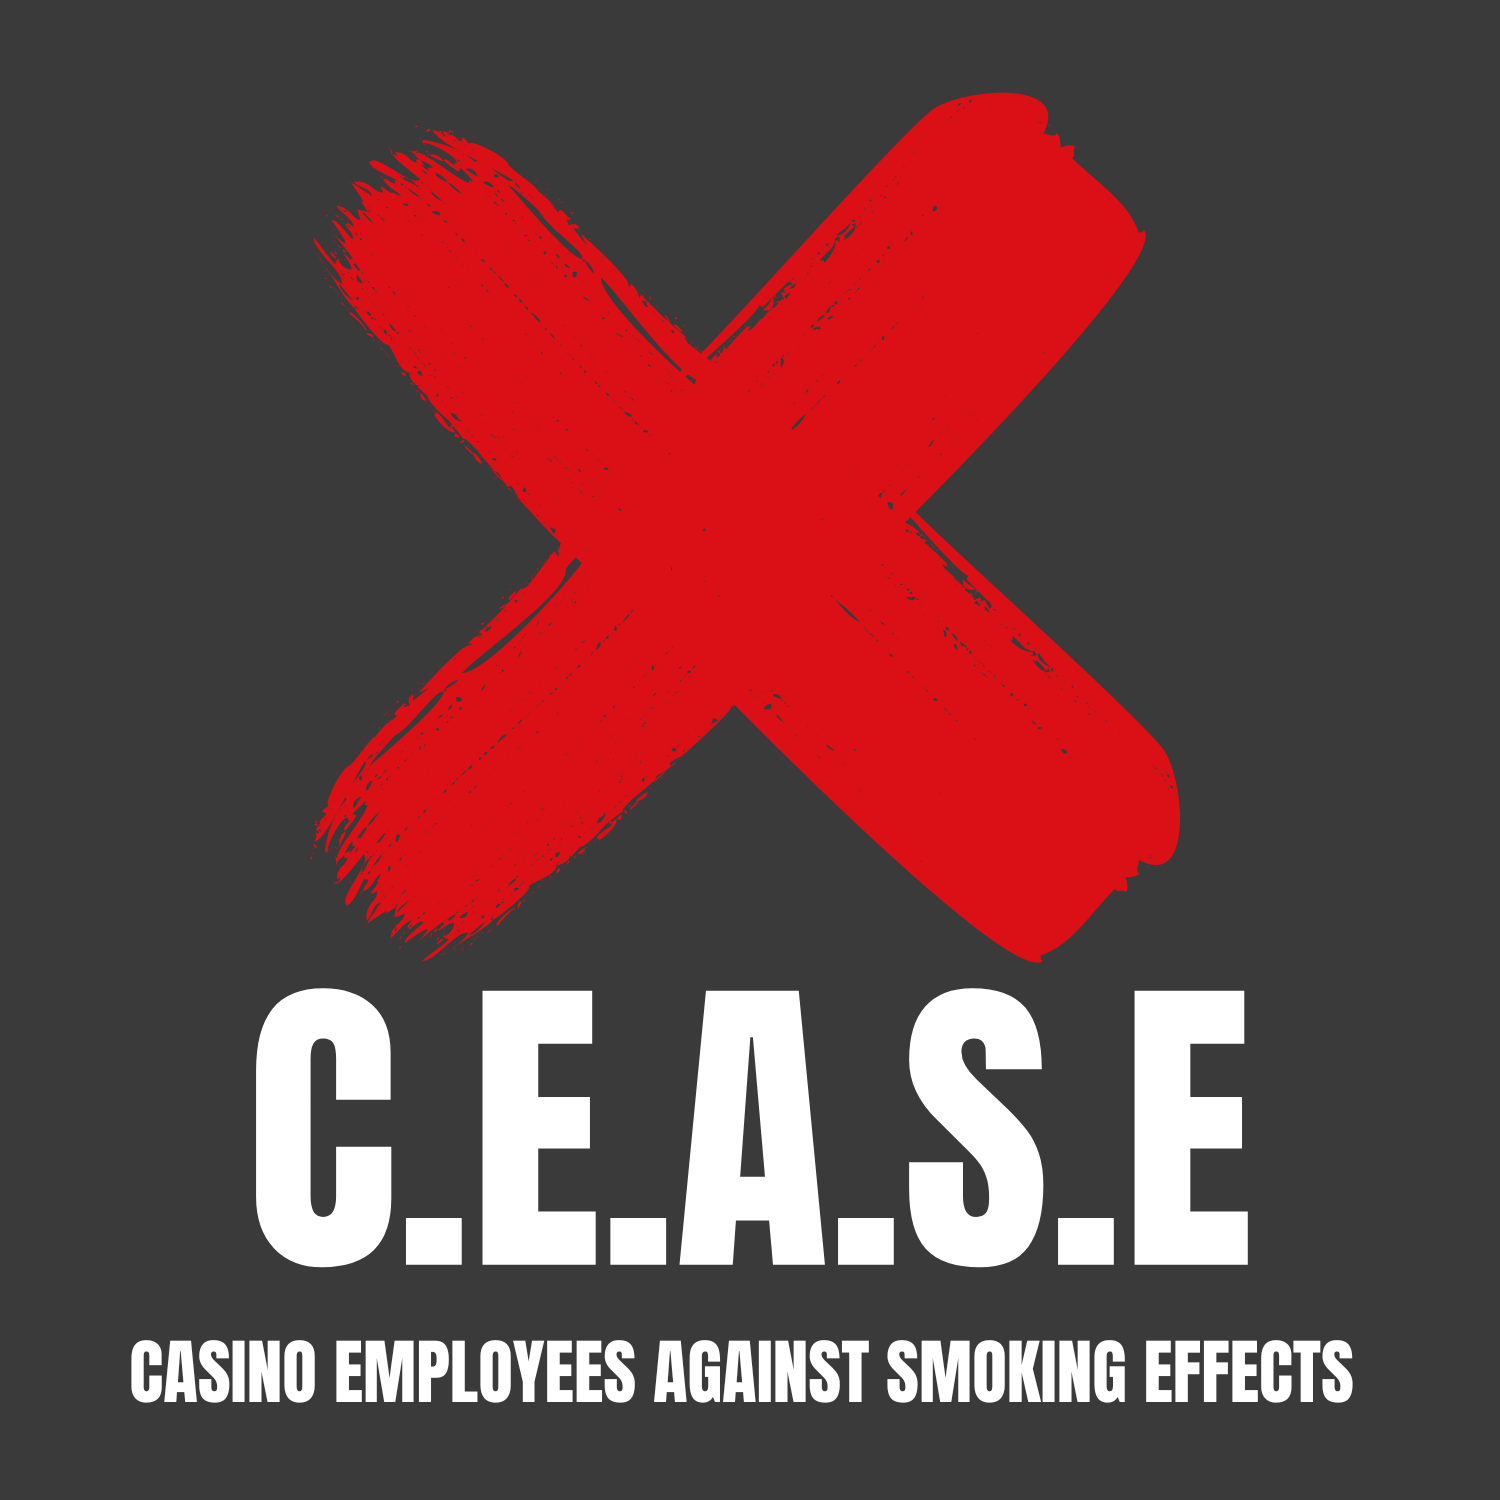 Casino Employees Against Smoking Effects (CEASE)